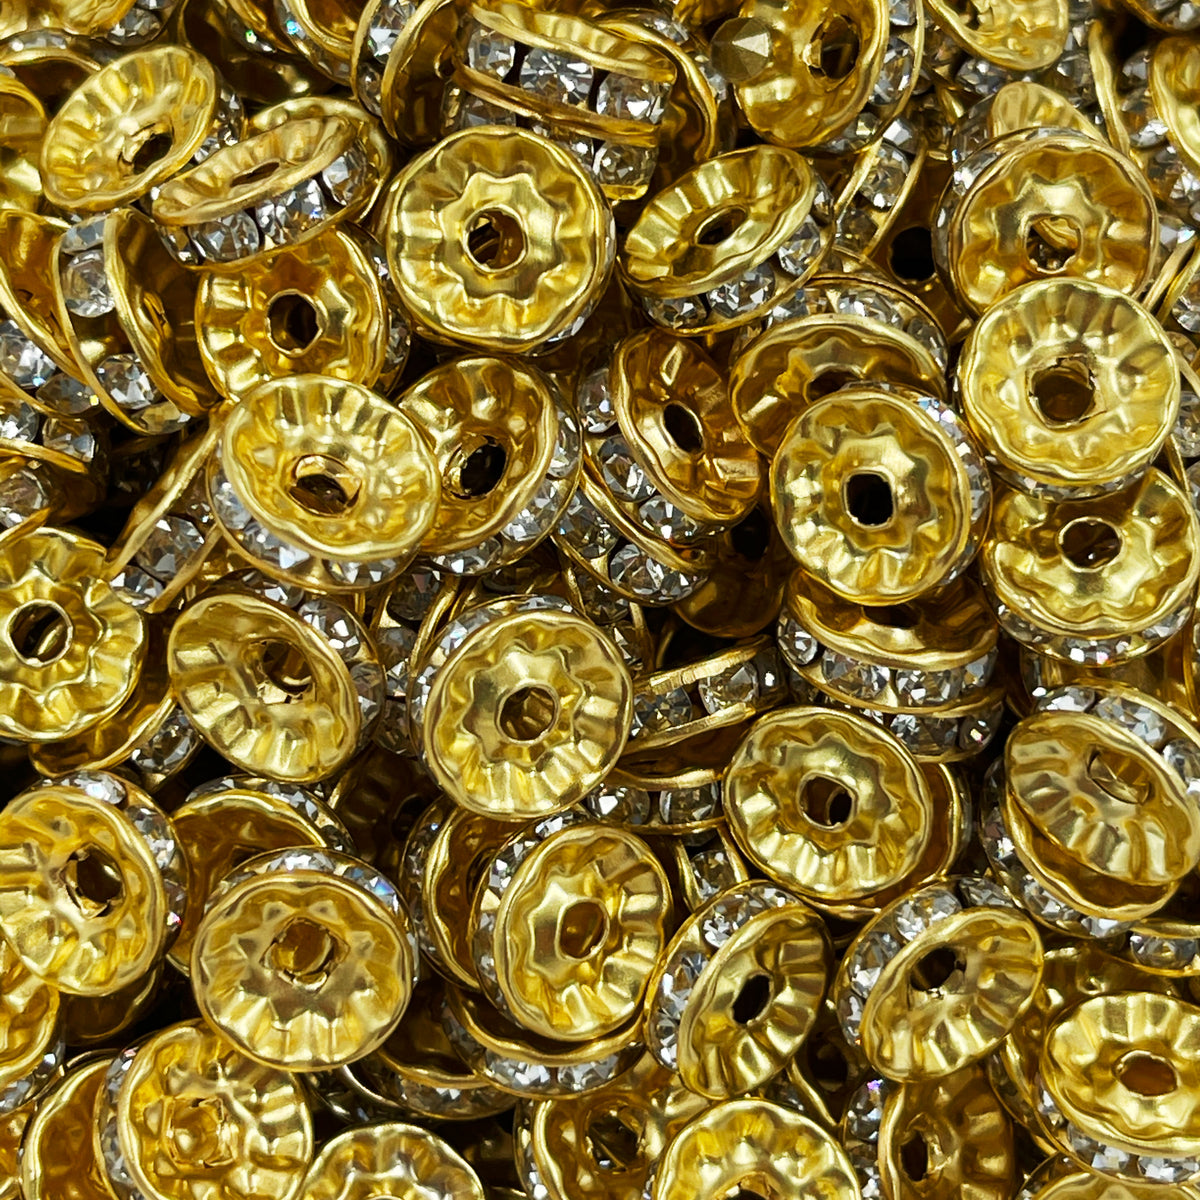 7x4mm Mini Rondelle Spacer Beads, Gold Tone - Golden Age Beads